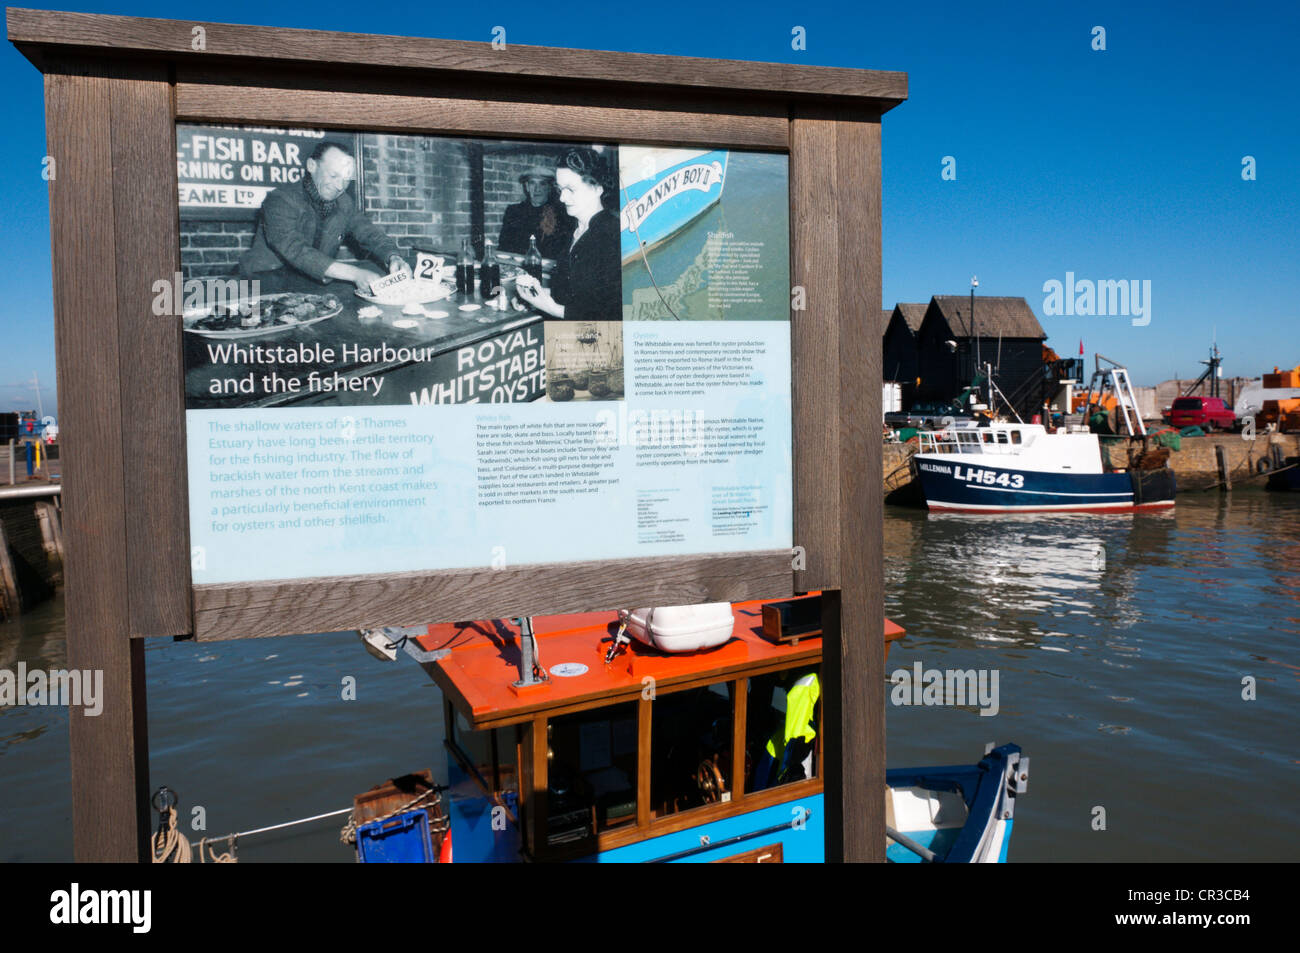 An interpretative sign about Whitstable harbour and fishery. Stock Photo